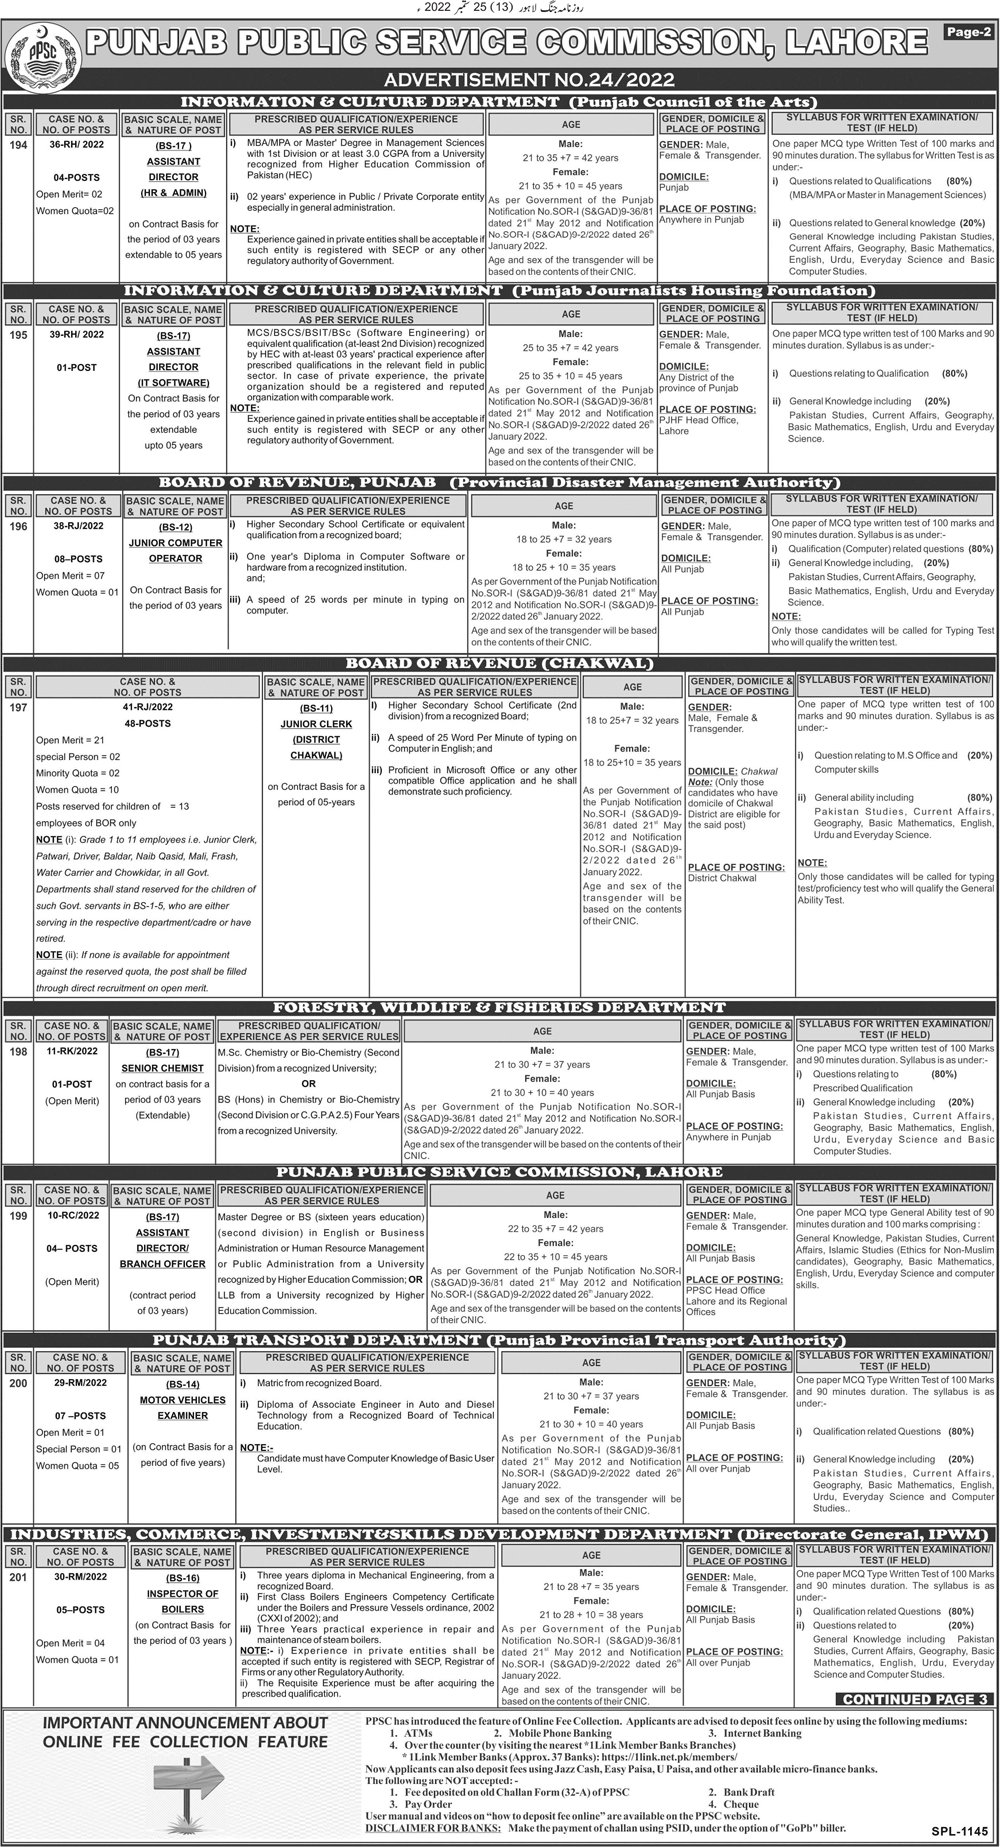 The Latest PPSC Government Jobs 2022